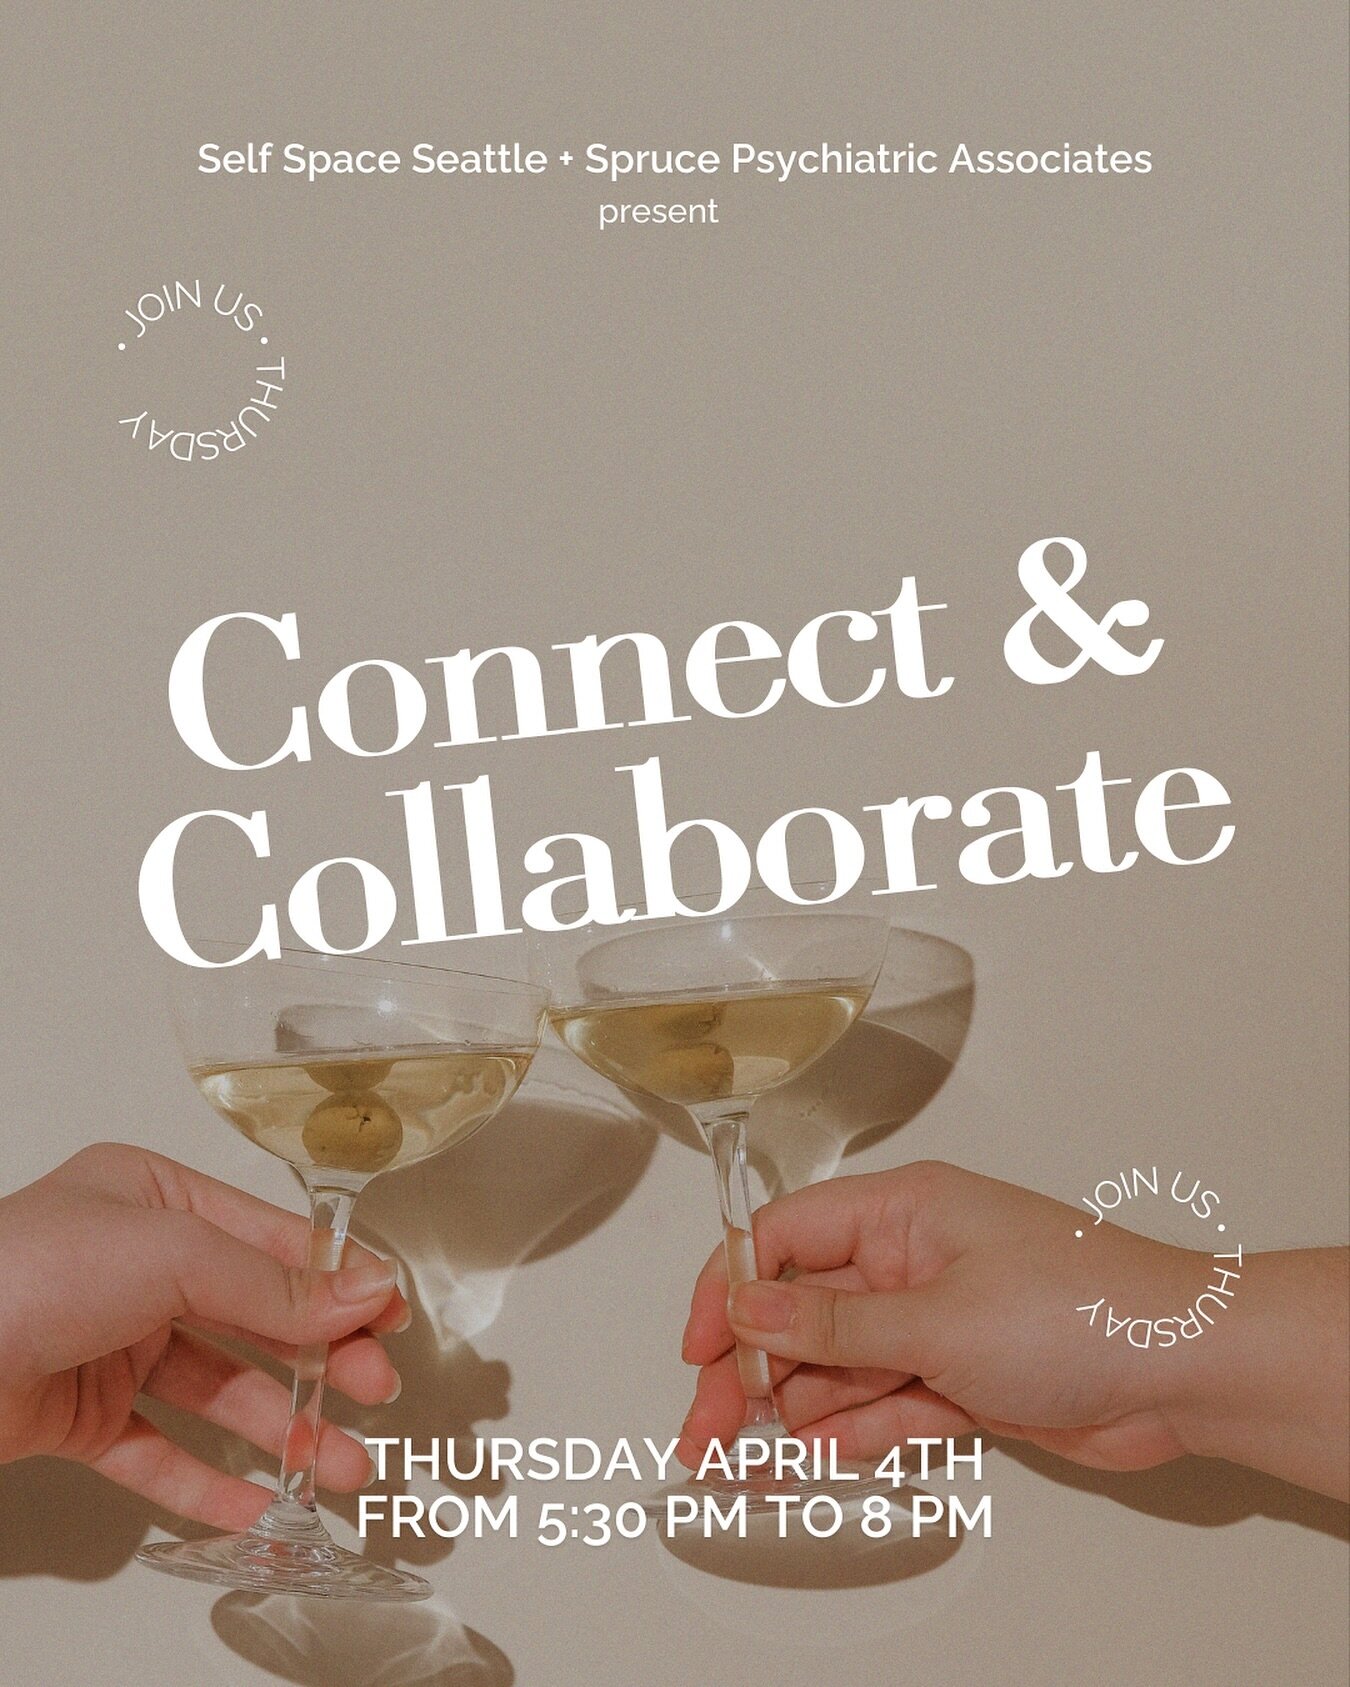 We cannot wait for this Thursday&rsquo;s Connect and Collaborate happy hour with @sprucepsychiatric

This is an incredible opportunity for healthcare professionals to gather and build relationships that help facilitate trusted referrals. We are honor